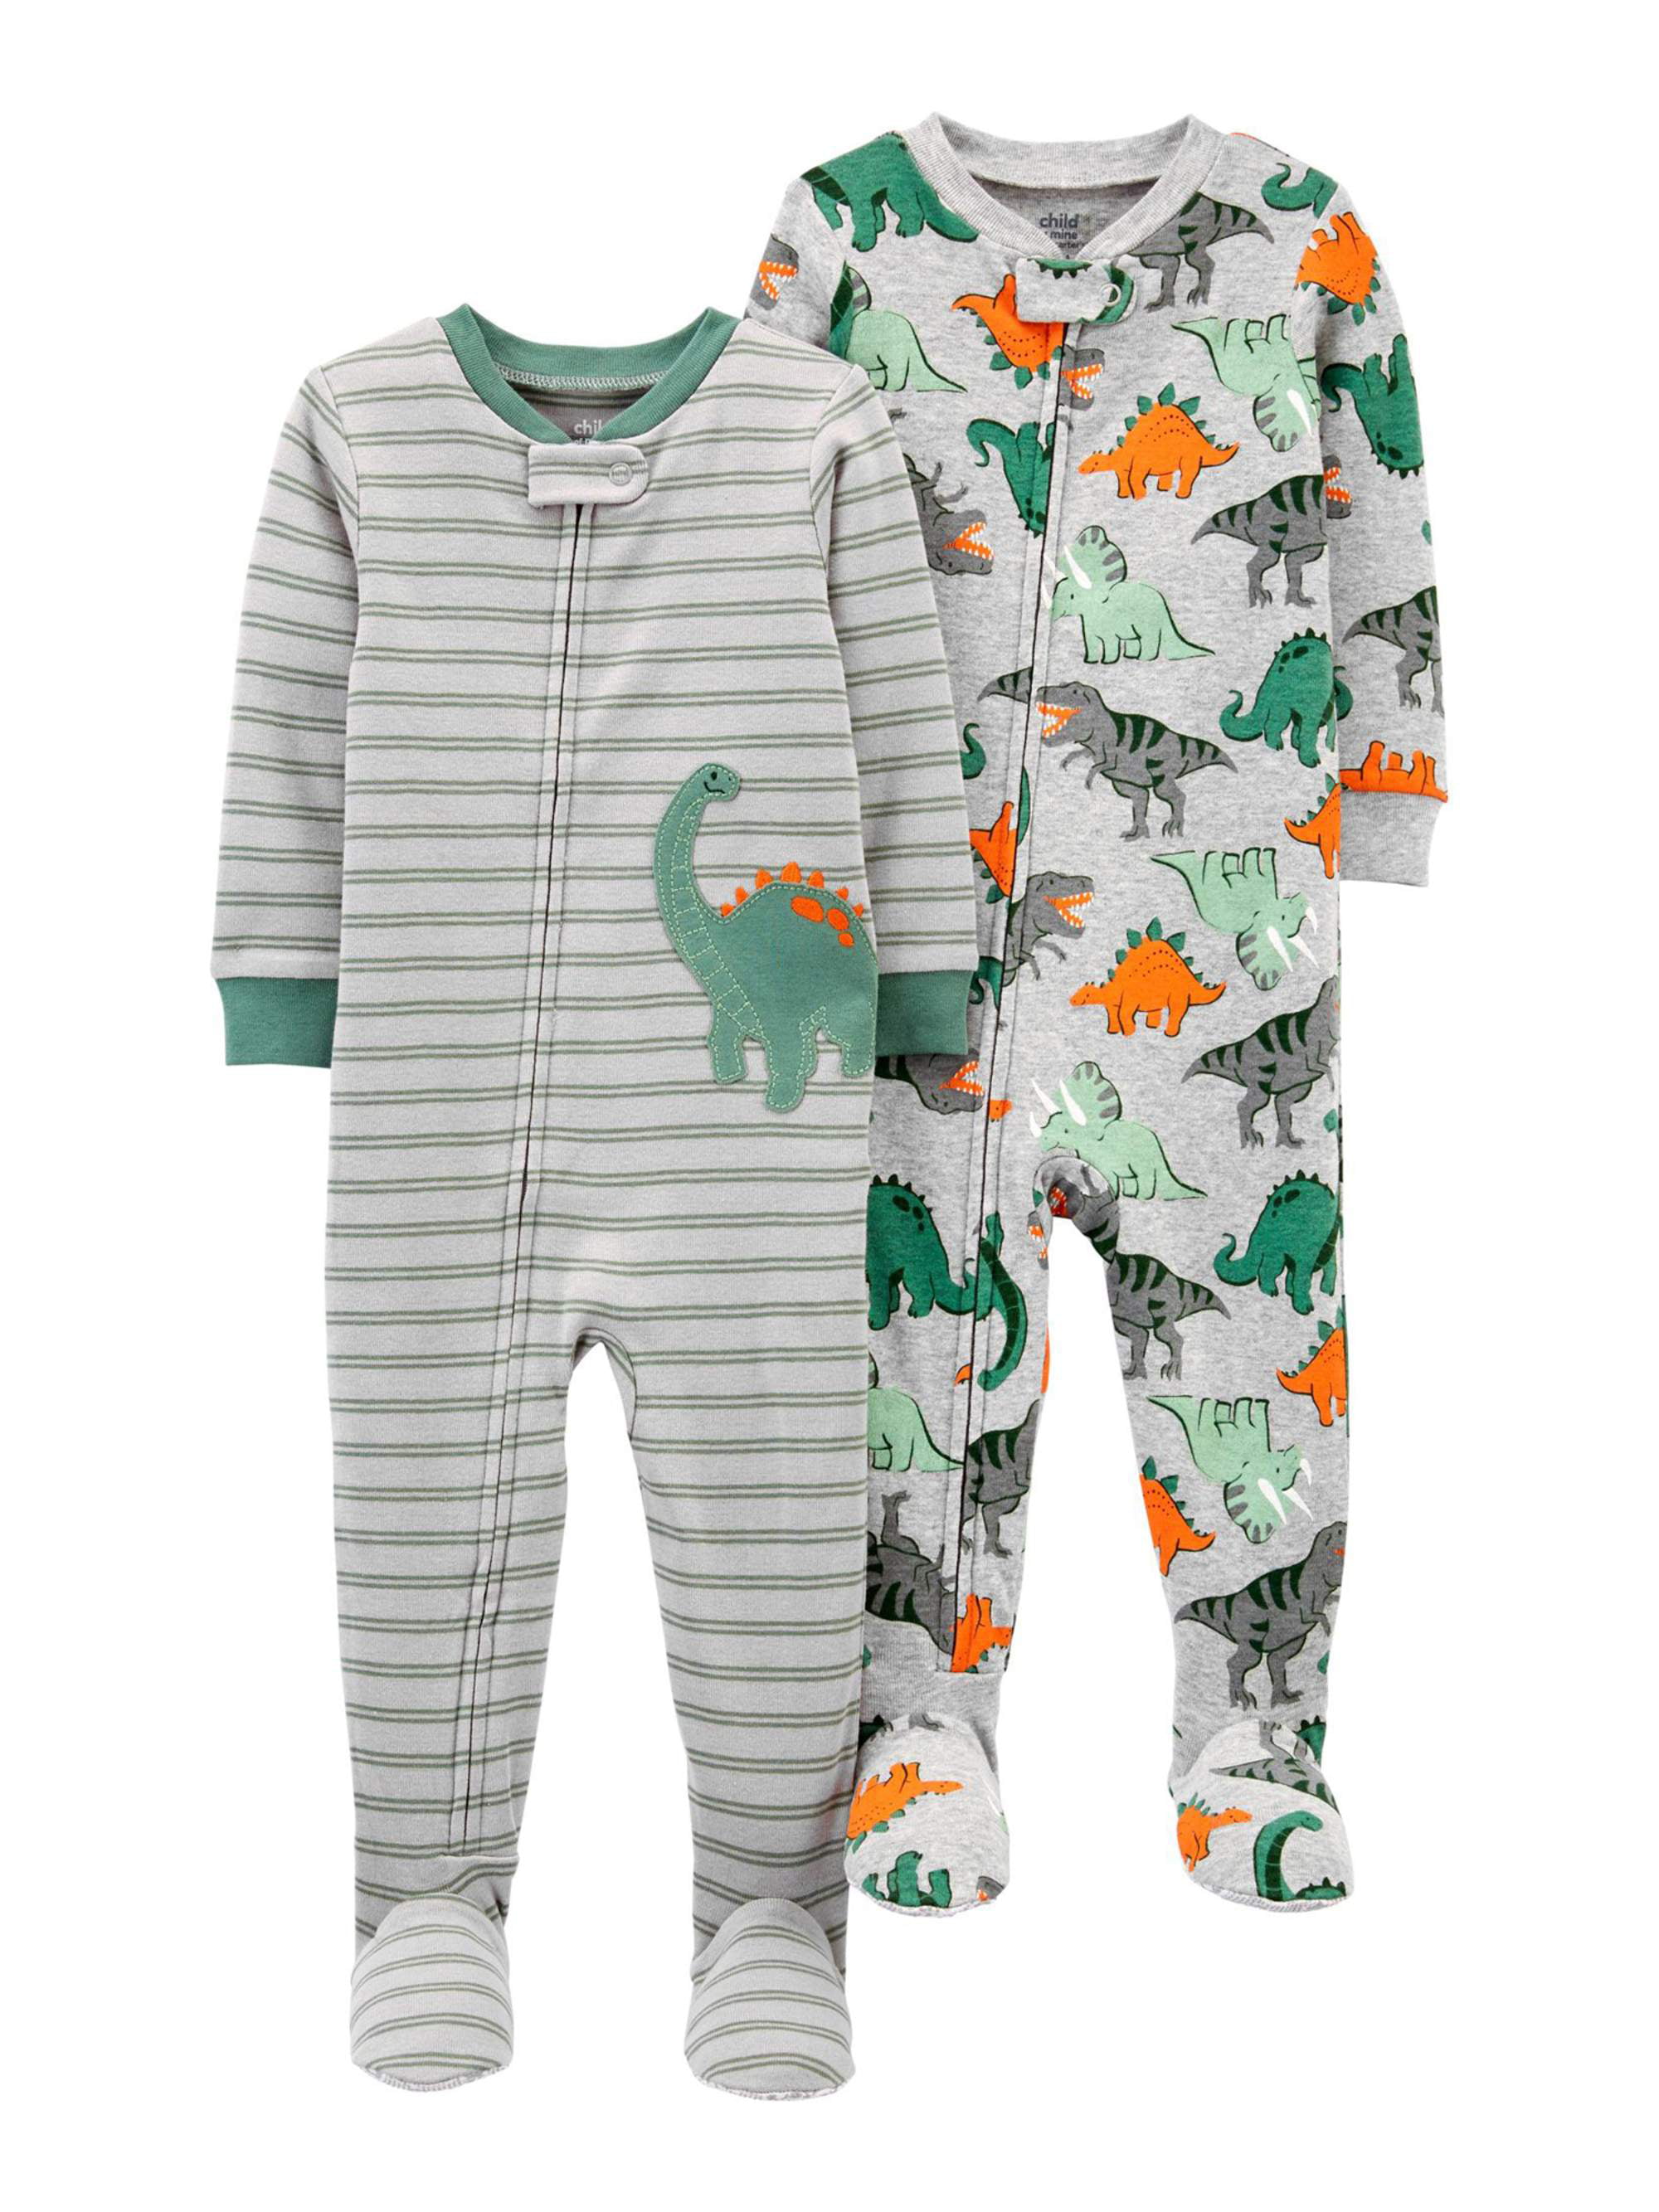 Carter's Child of Mine Baby and Toddler Boy Snug-Fit One-Piece Pajamas,  2-Pack, Sizes 6M-5T - Walmart.com